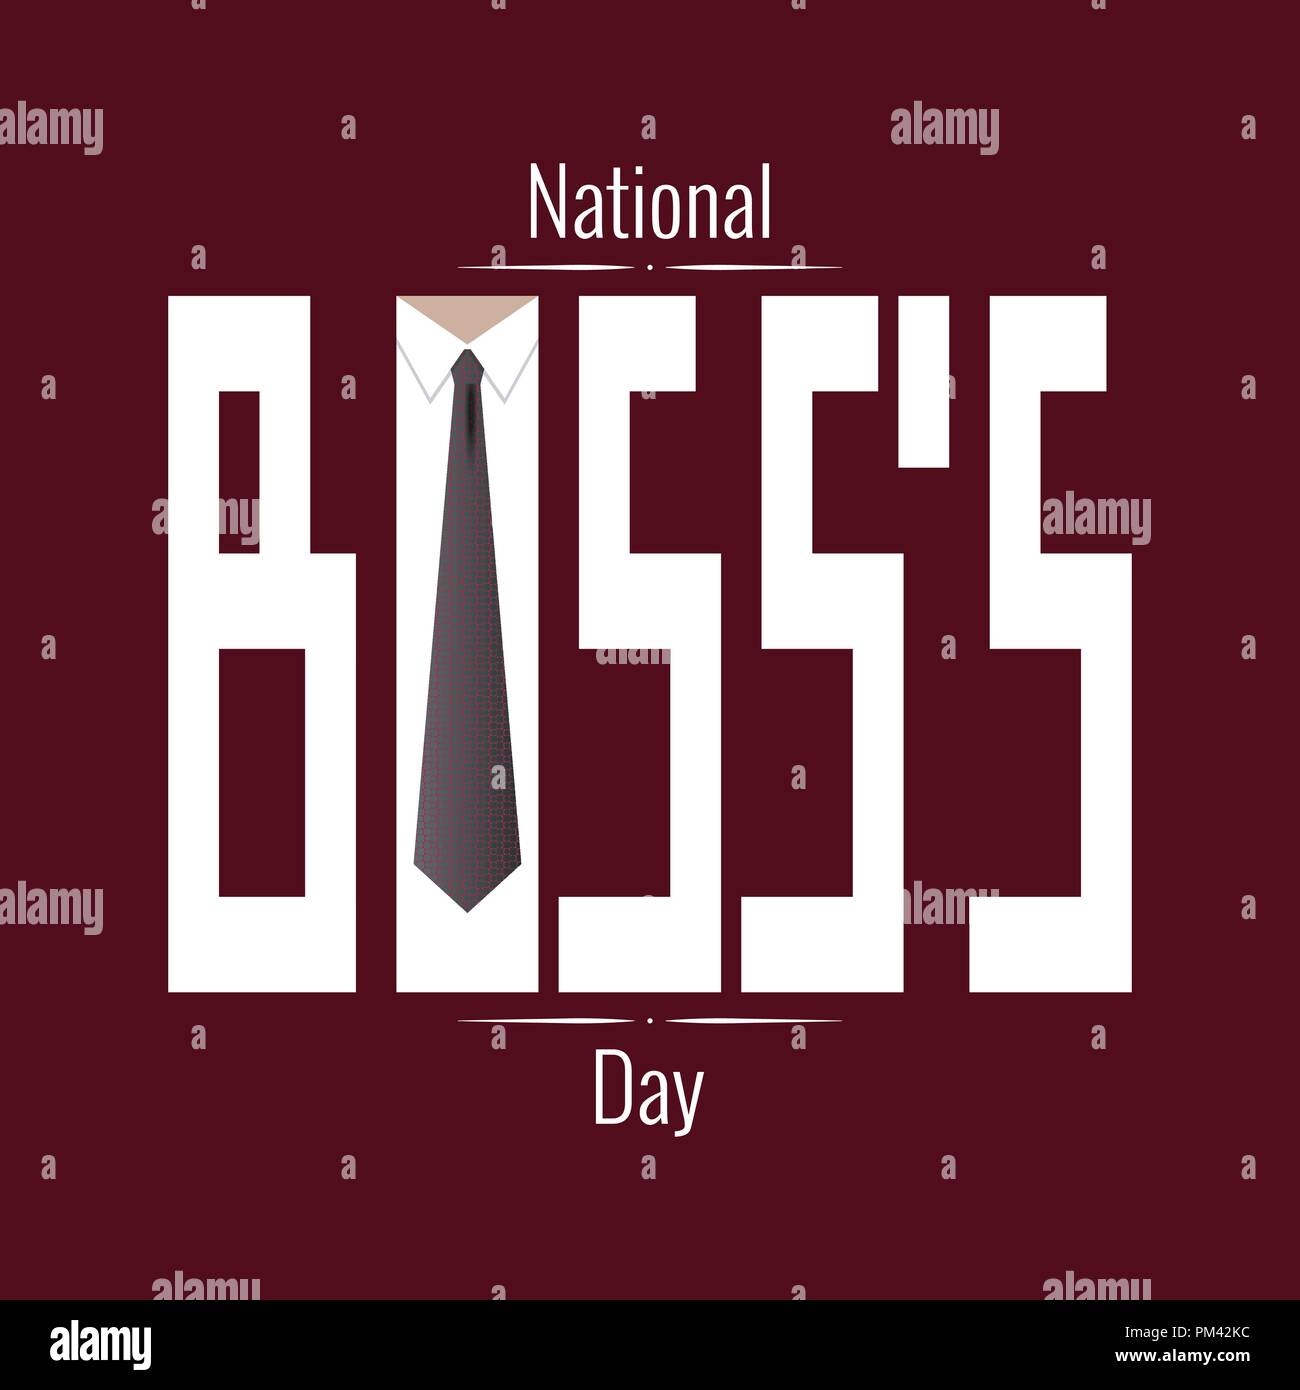 National Boss s Day. Concept of a business holiday. Event name, tie and